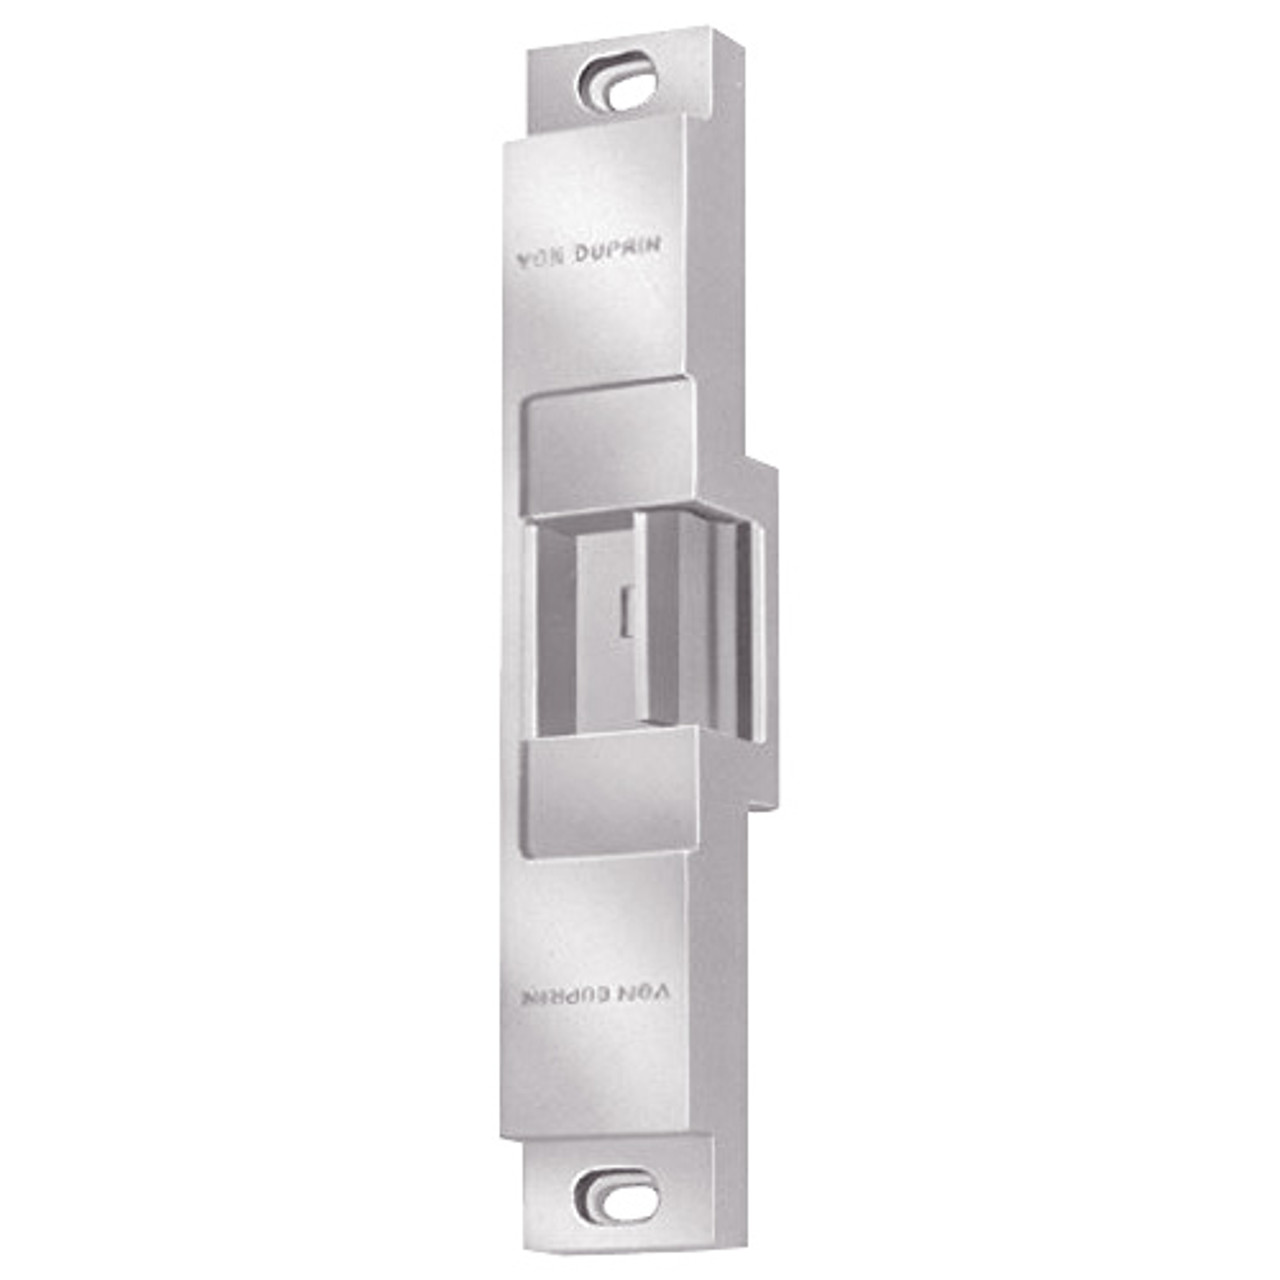 6112-DS-12VDC-US32 Von Duprin Electric Strike in Bright Stainless Steel Finish